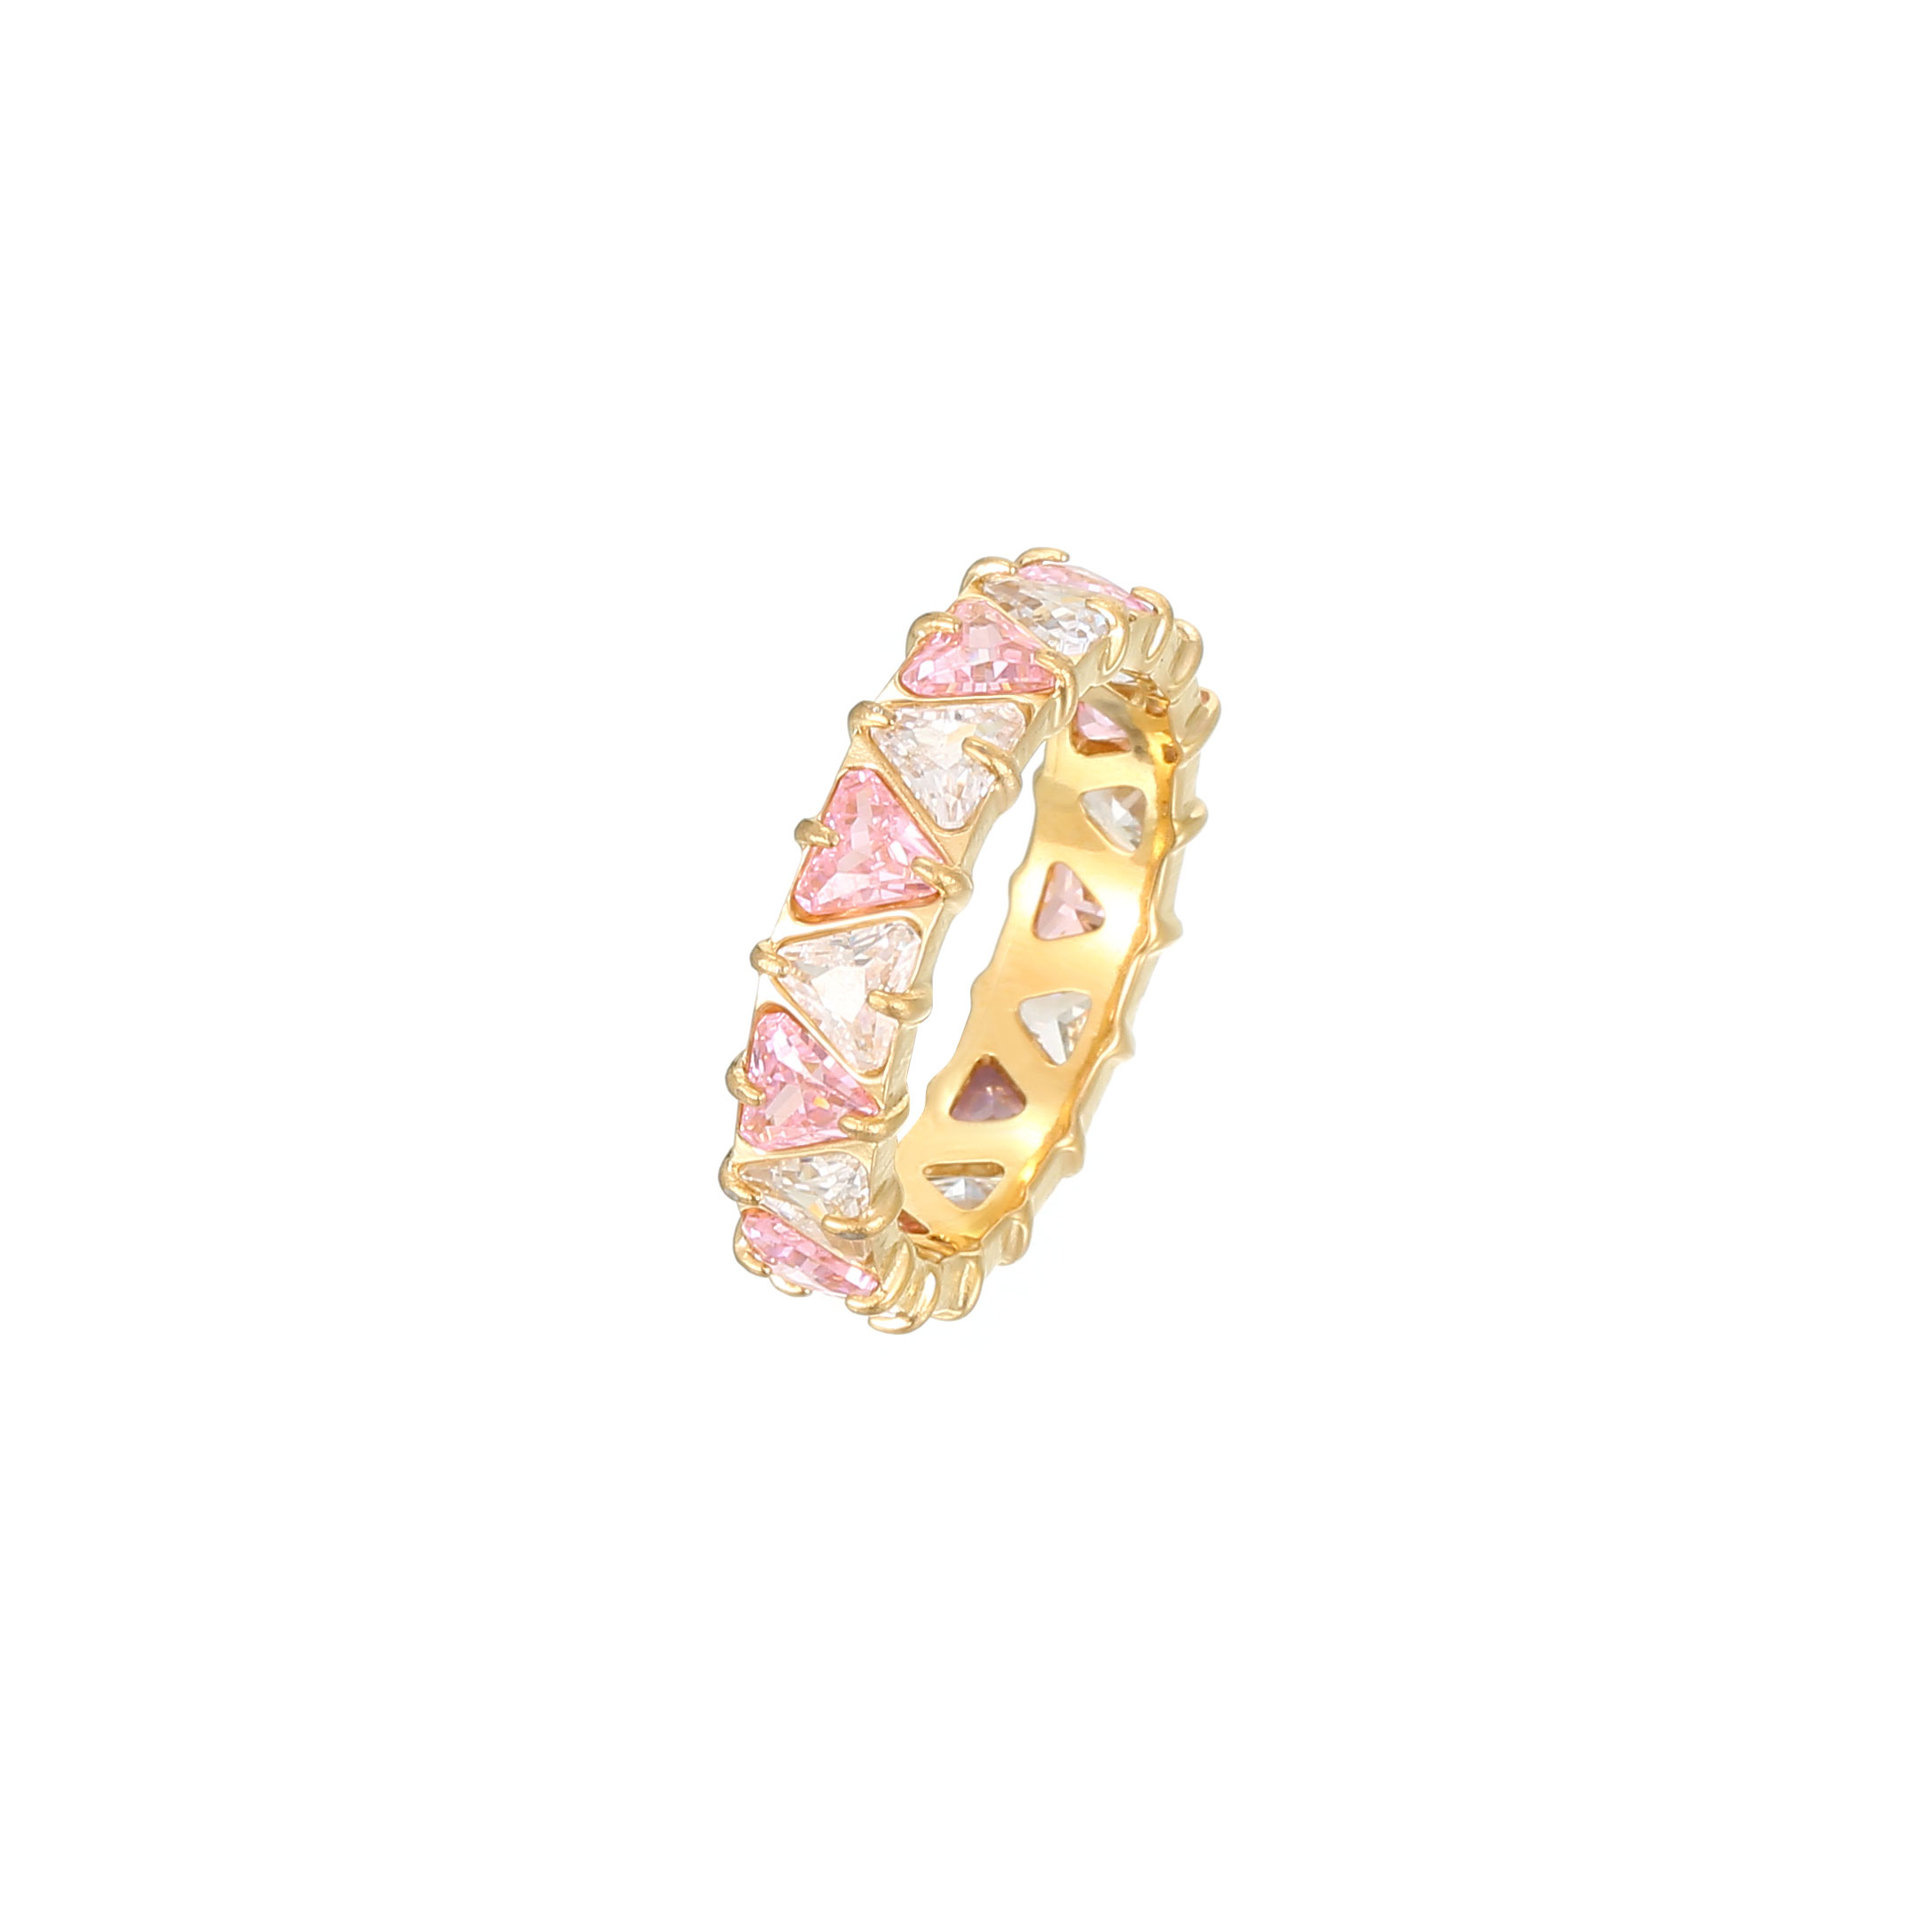 2:Gold - pink clear zircon